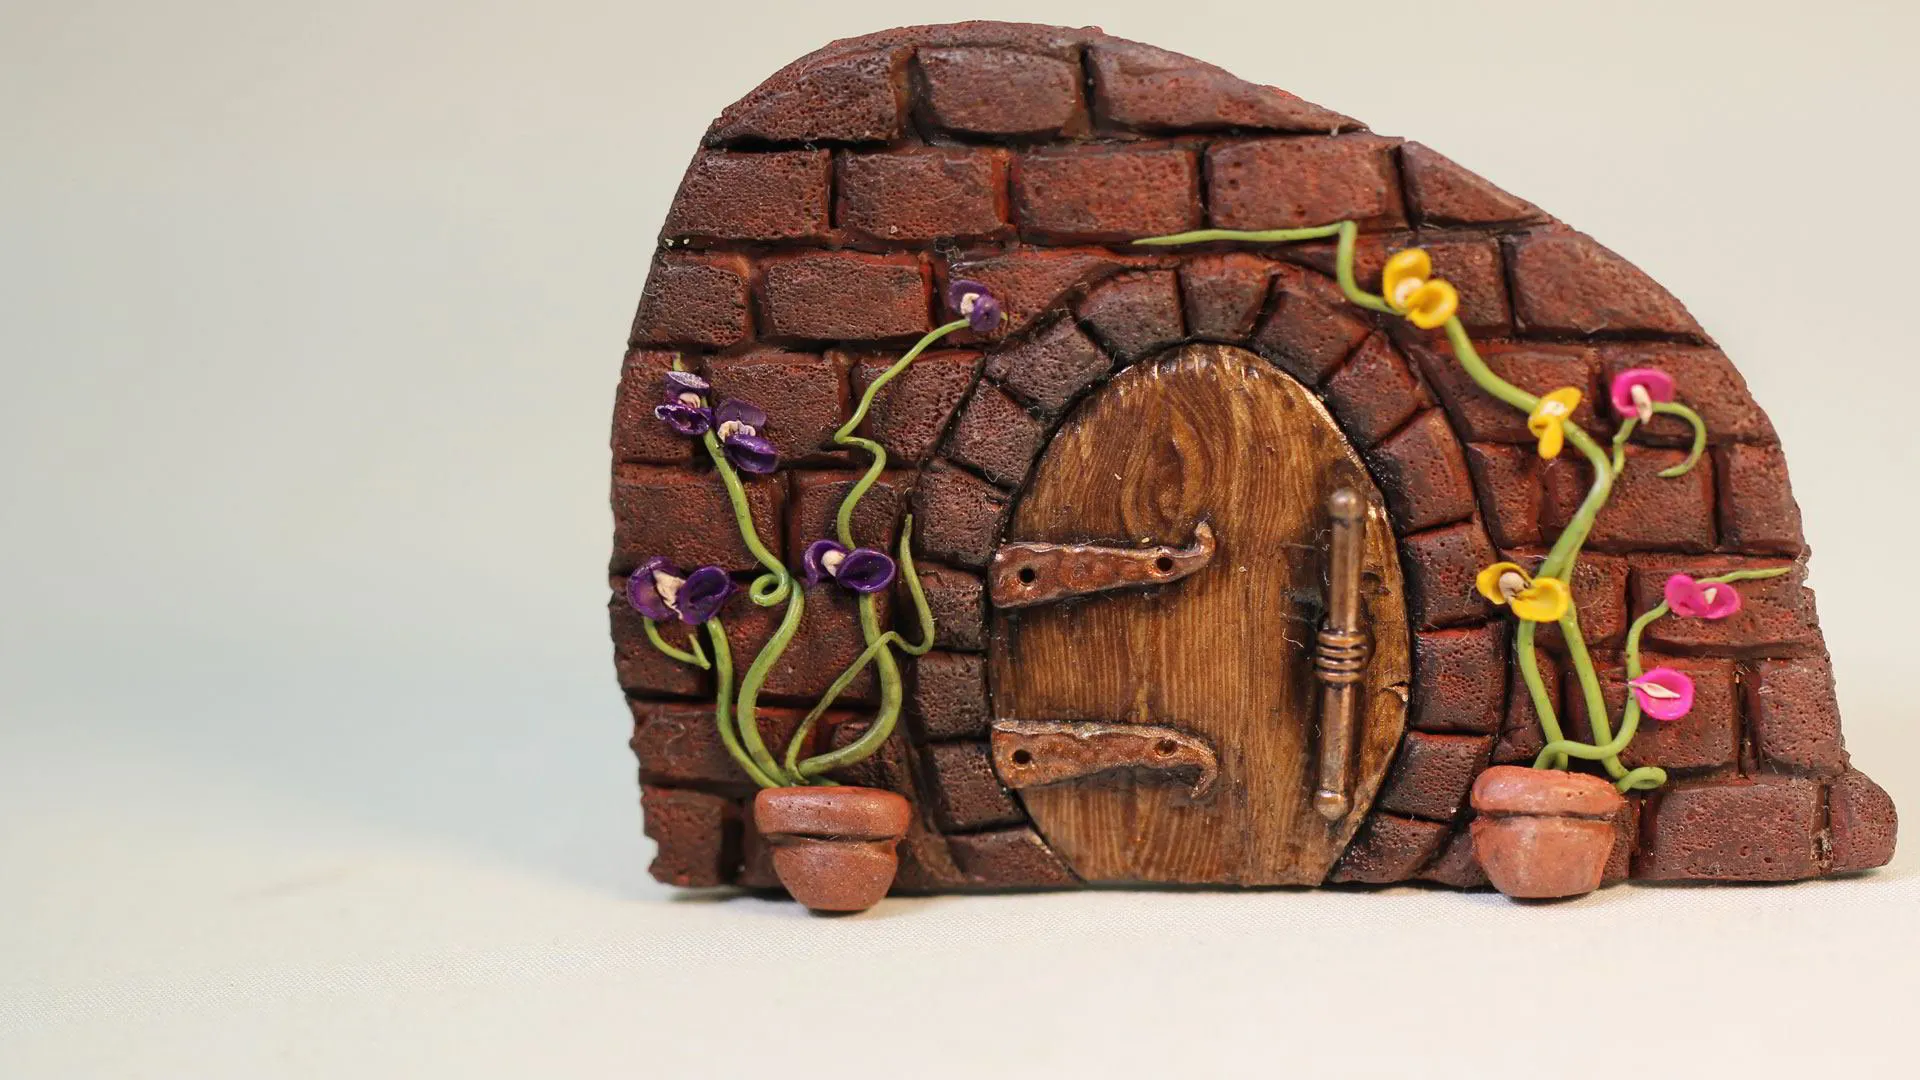 Vol-077 Polymer Clay Fairy Doors for Miniature Gardens and Decor Jewelry